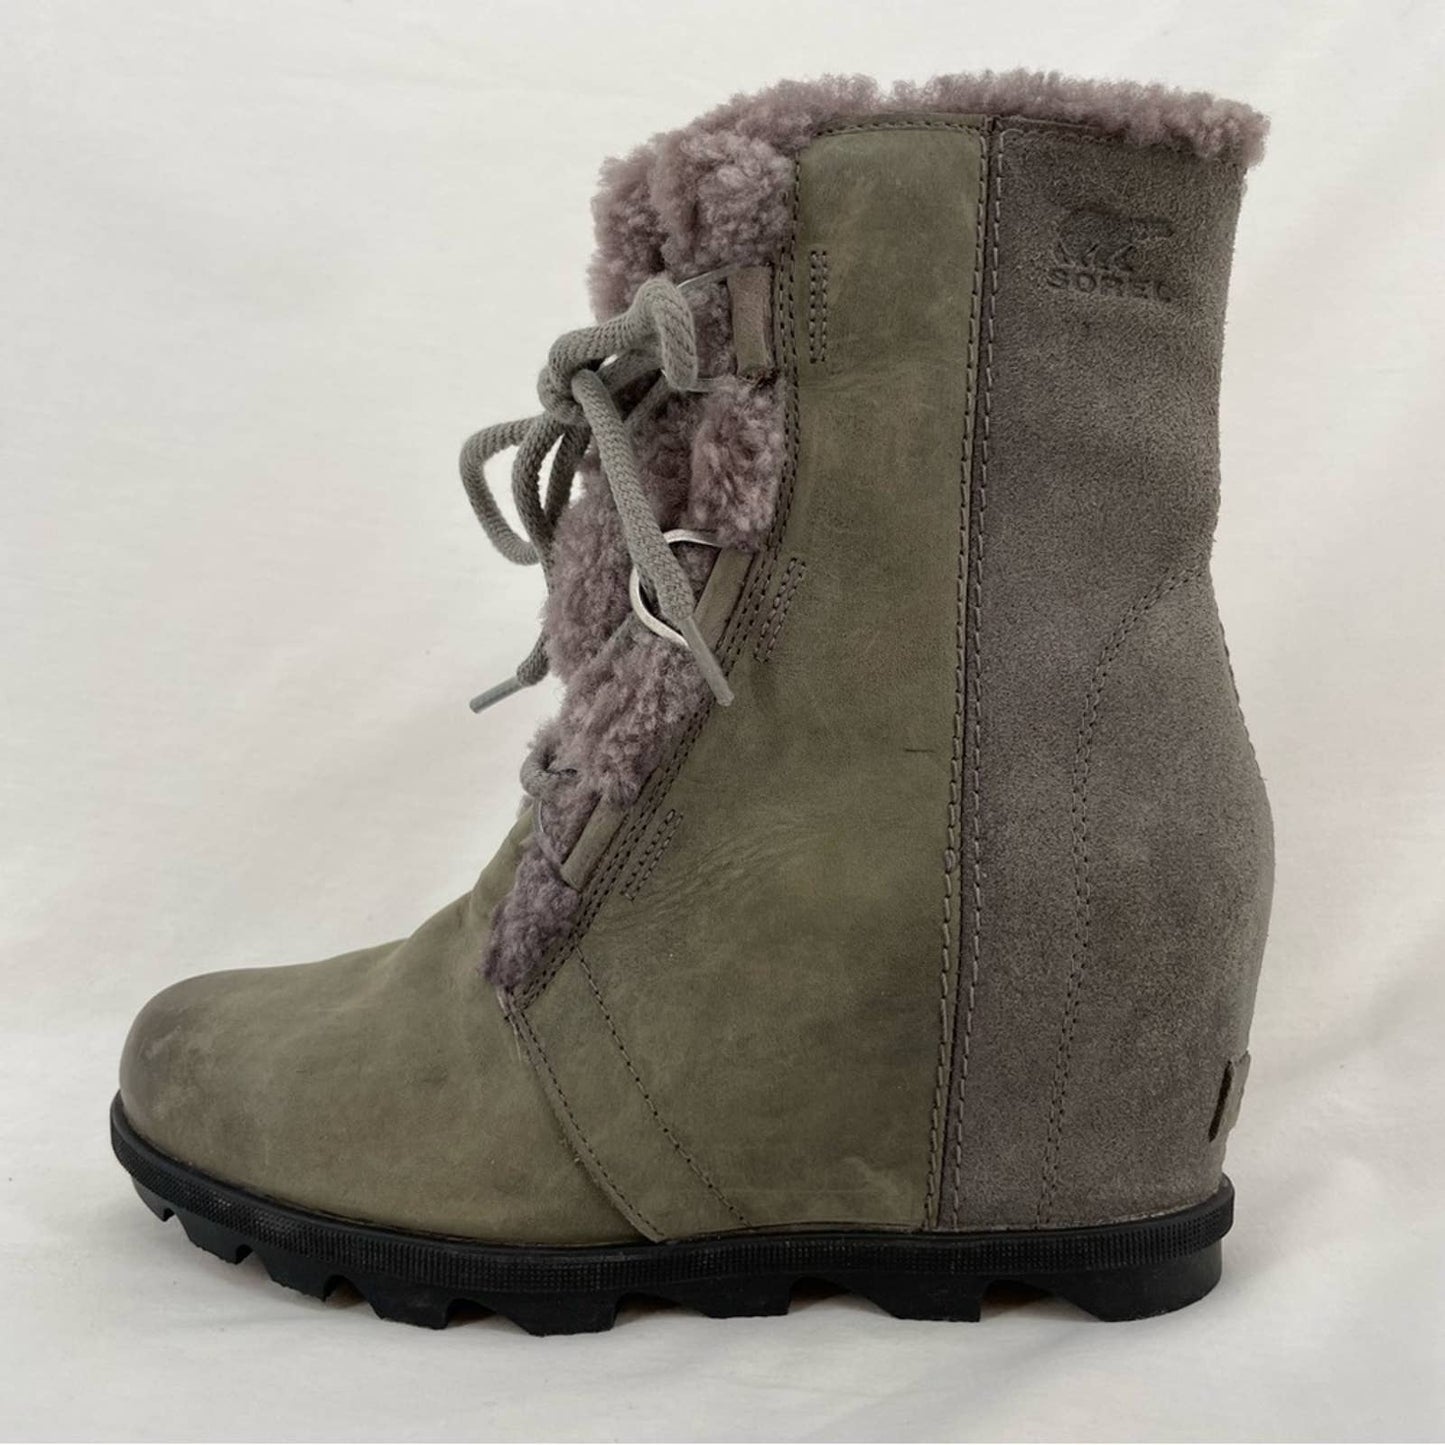 Sorel Joan of Arctic Wedge II Shearling Leather Boots Quarry Grey Greige Size 9.5